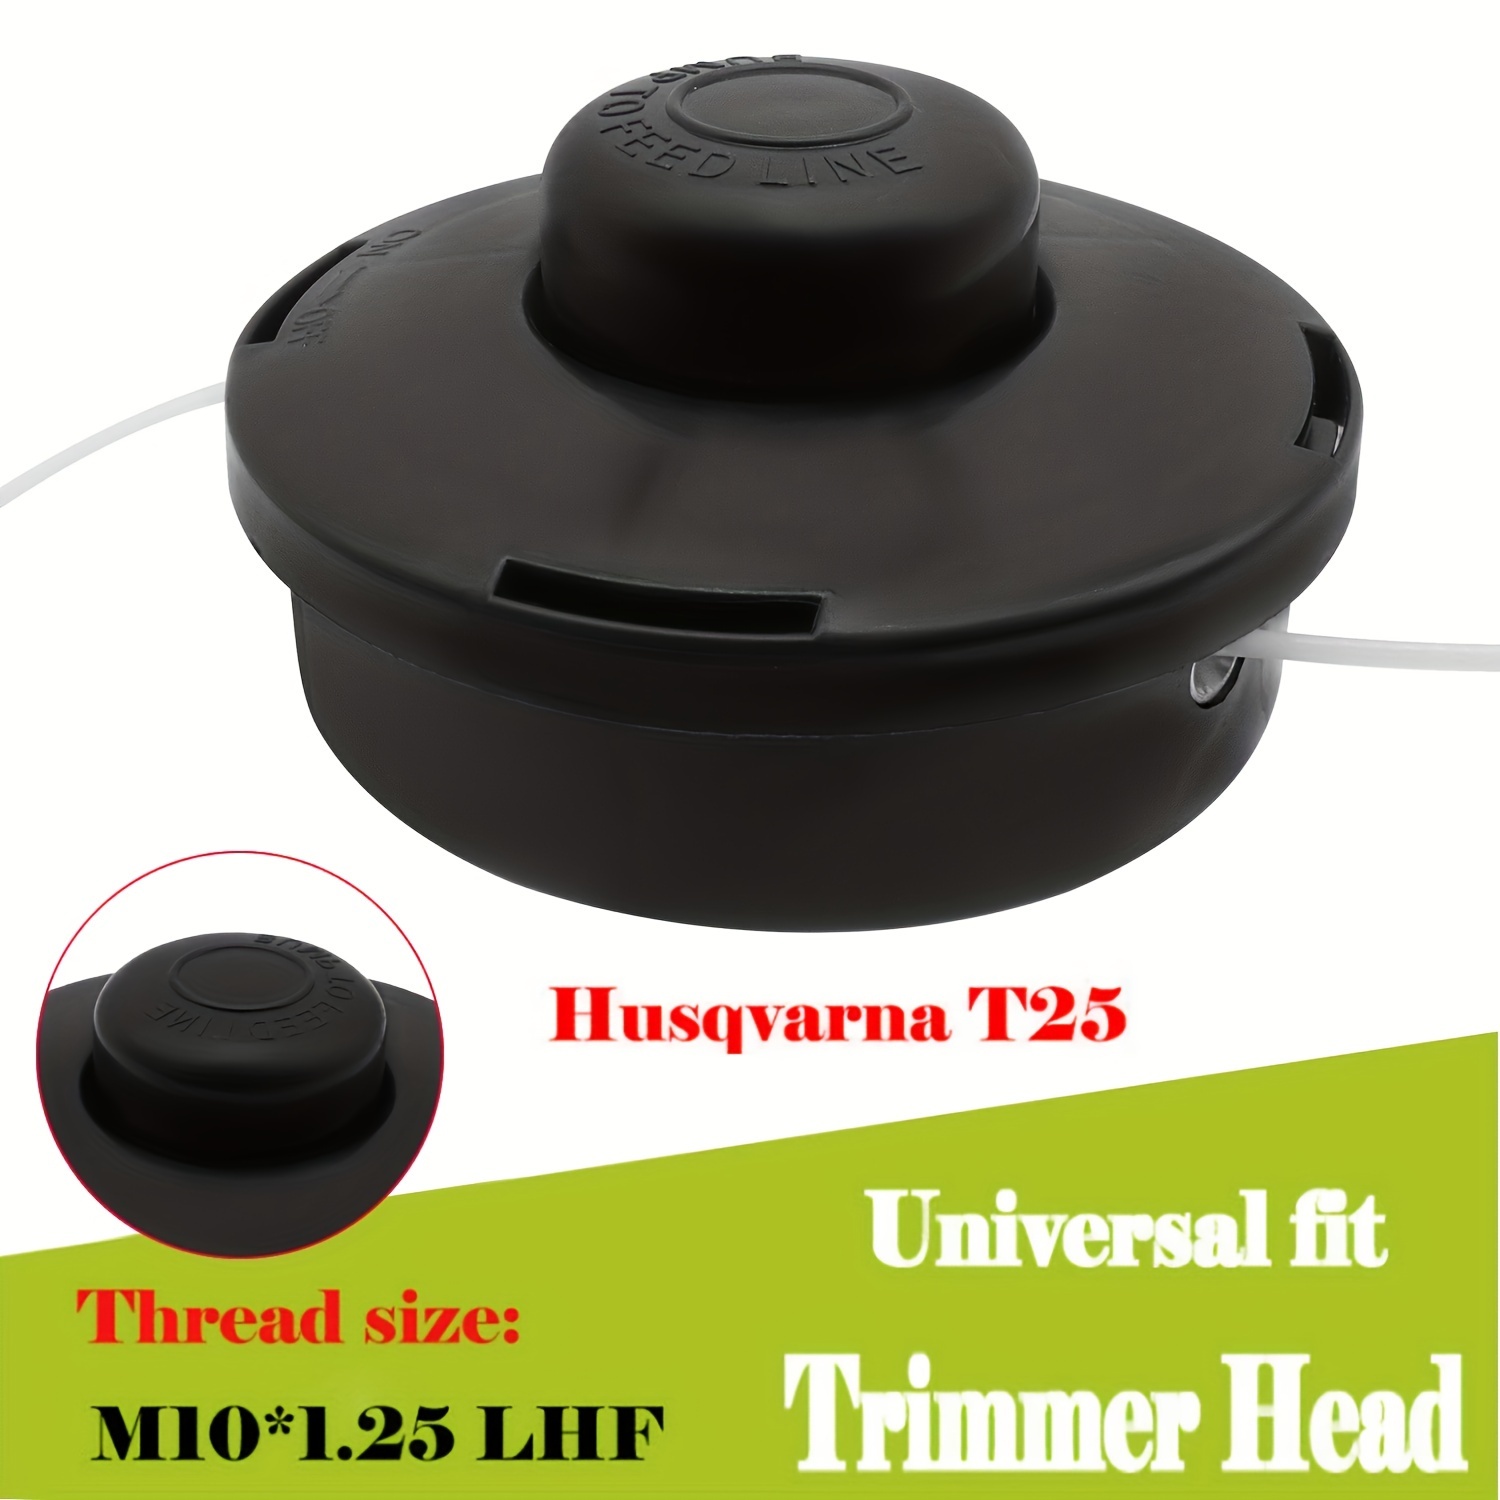 

1pc, T25 Universal Trimmer Head, M10*1.25 Lhf Thread Size, 4.44-inch Diameter Cutter, Gas String Trimmers Compatible, Durable Plastic Garden Tool